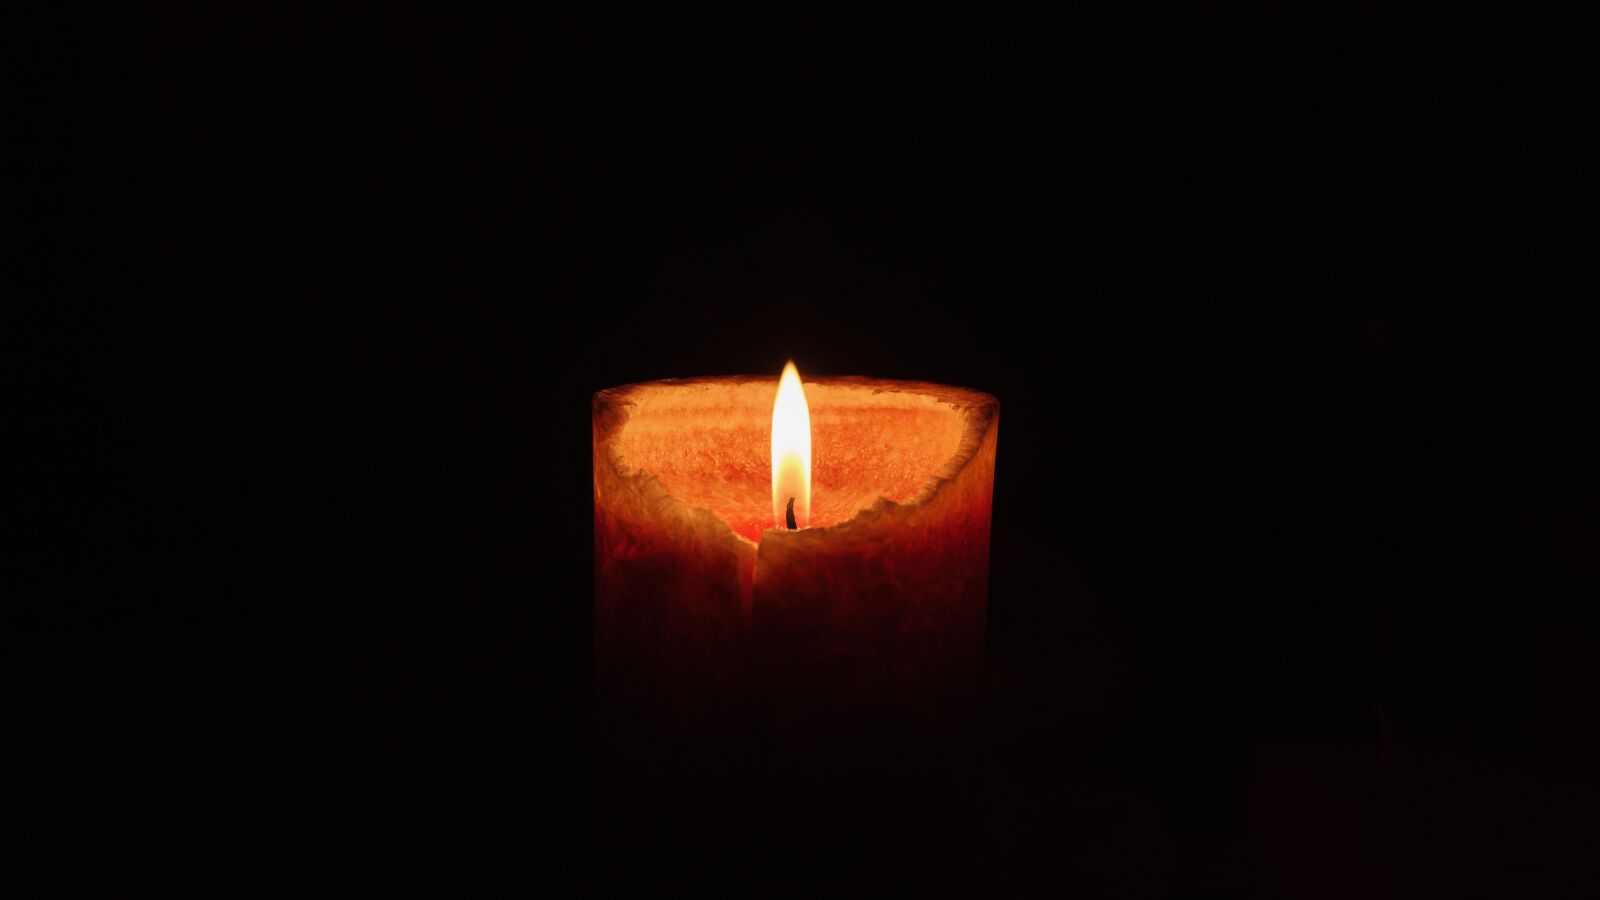 Sony a6500 sample photo. "Candle, the flame, light" photography